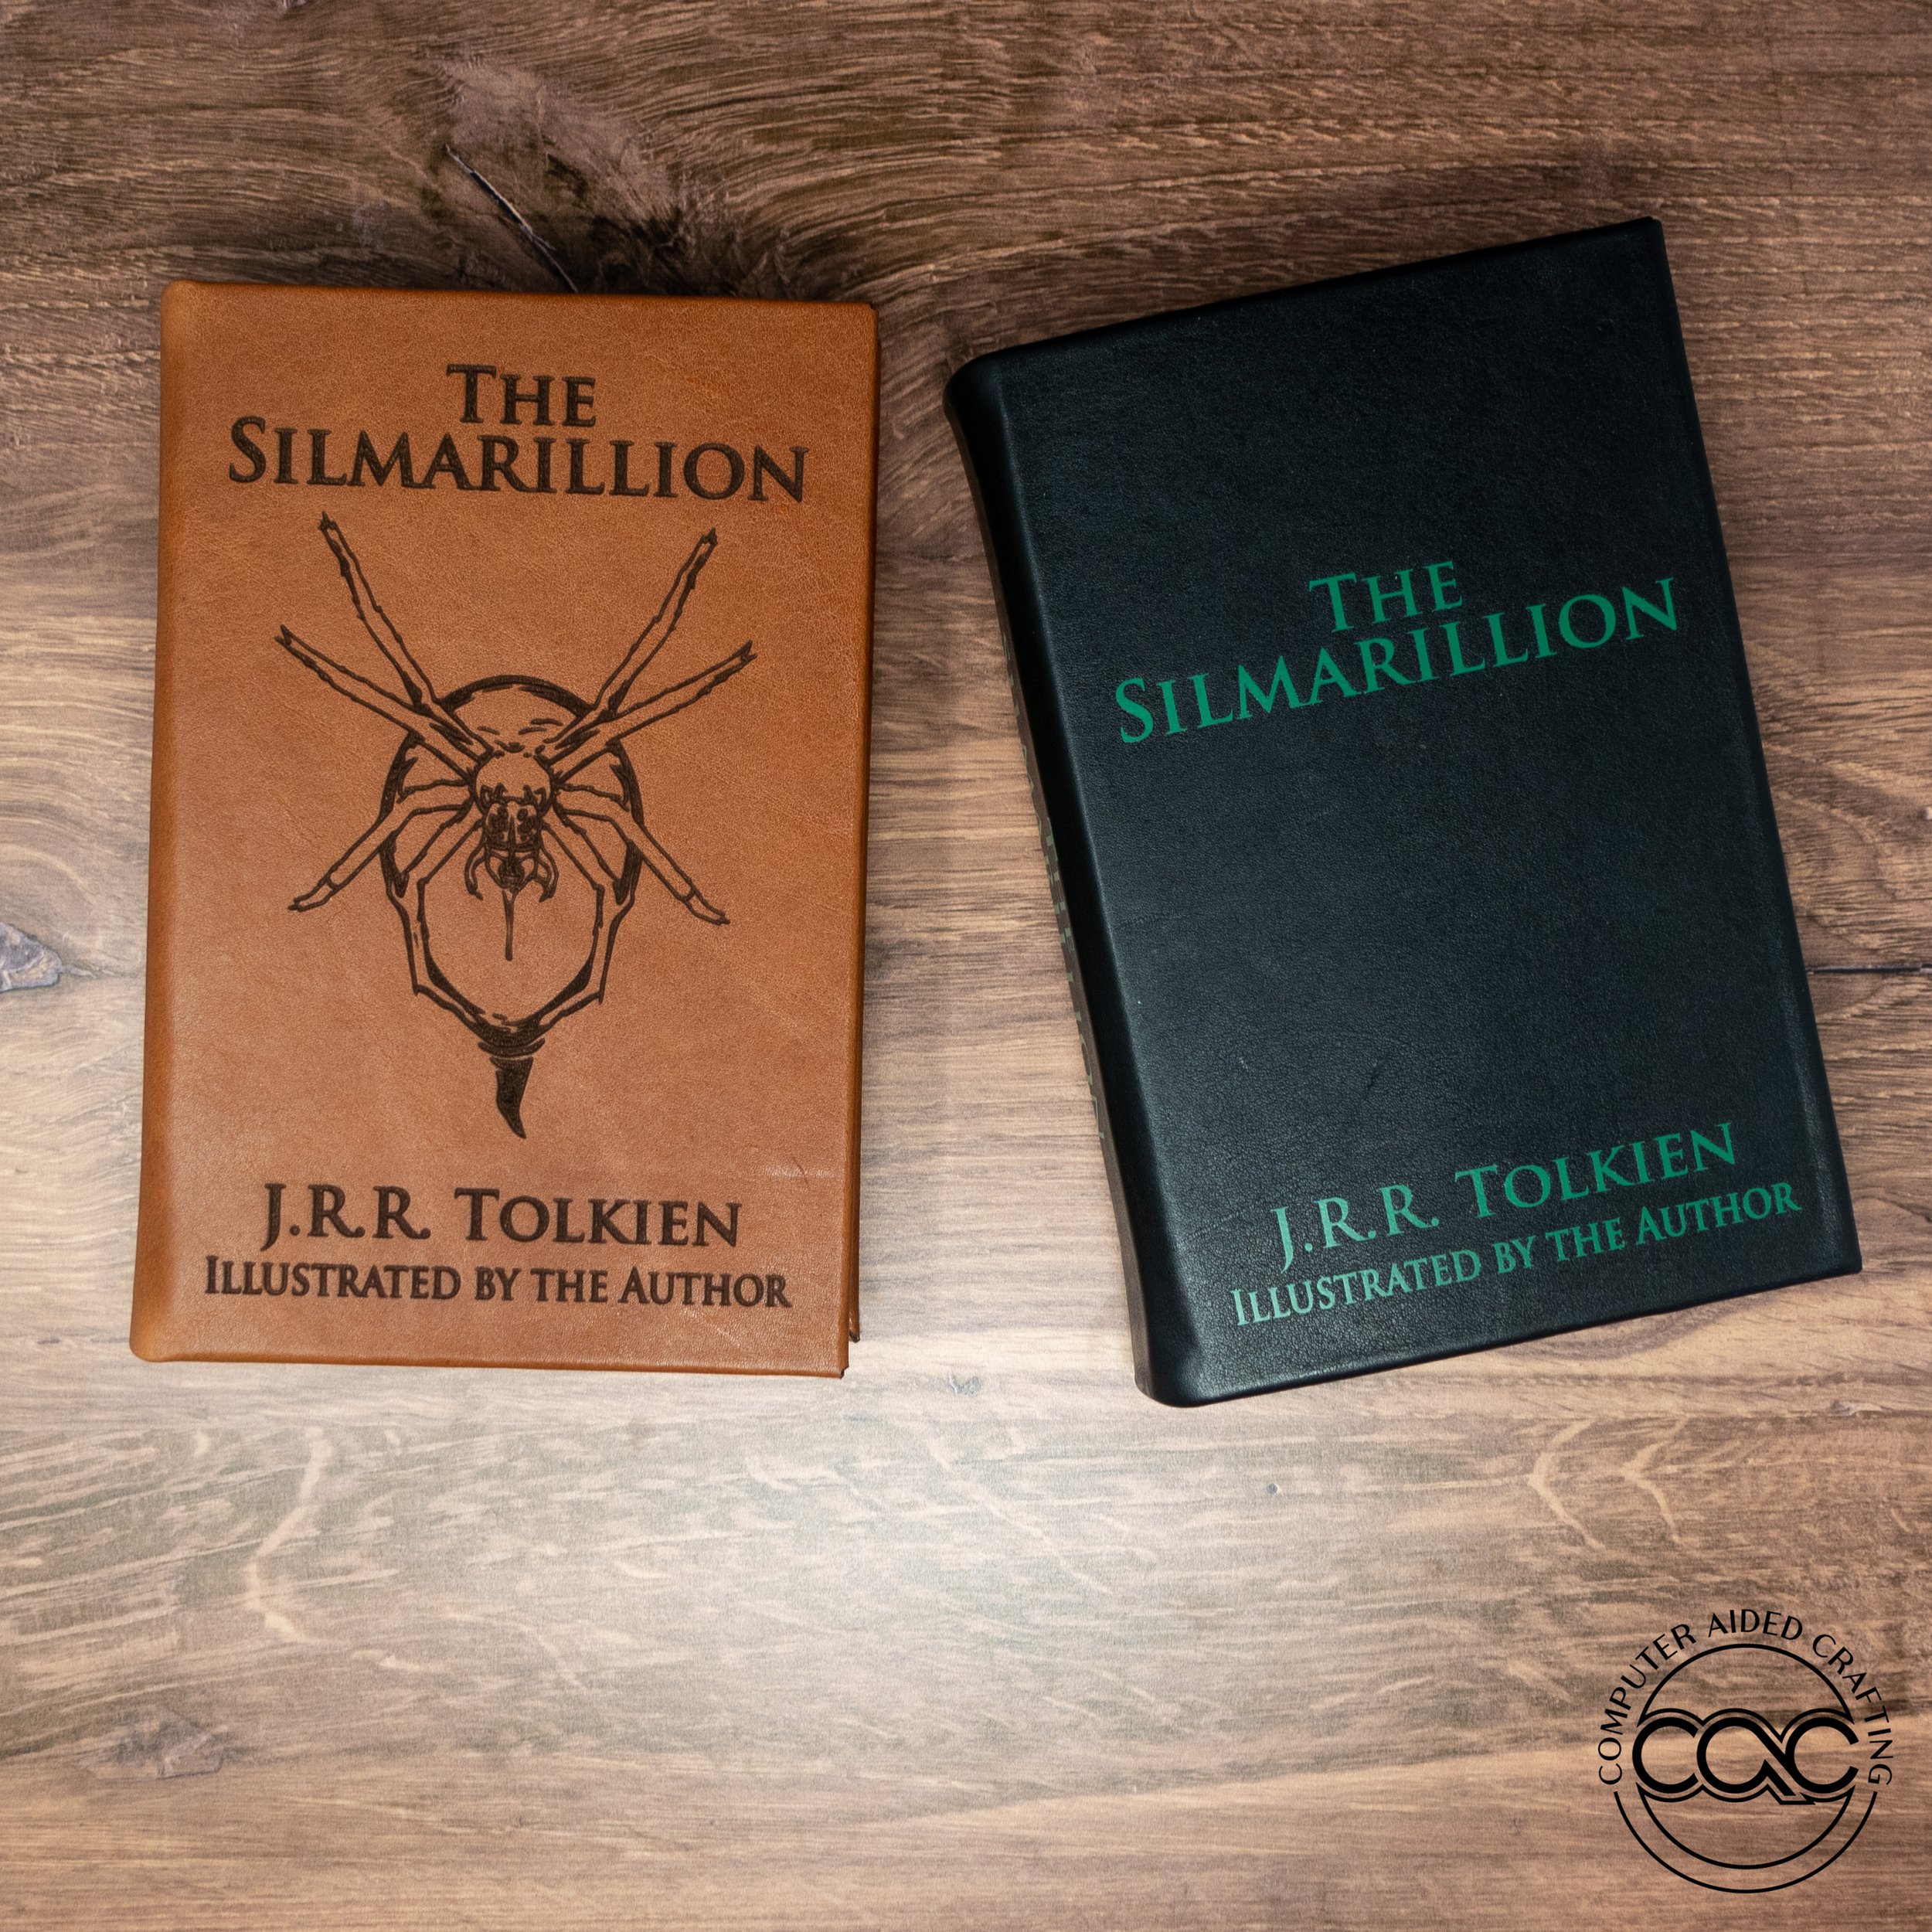 The Silmarillion by J.R.R Tolkien Before Lord Of The Rings And The Hobbit |  eBay